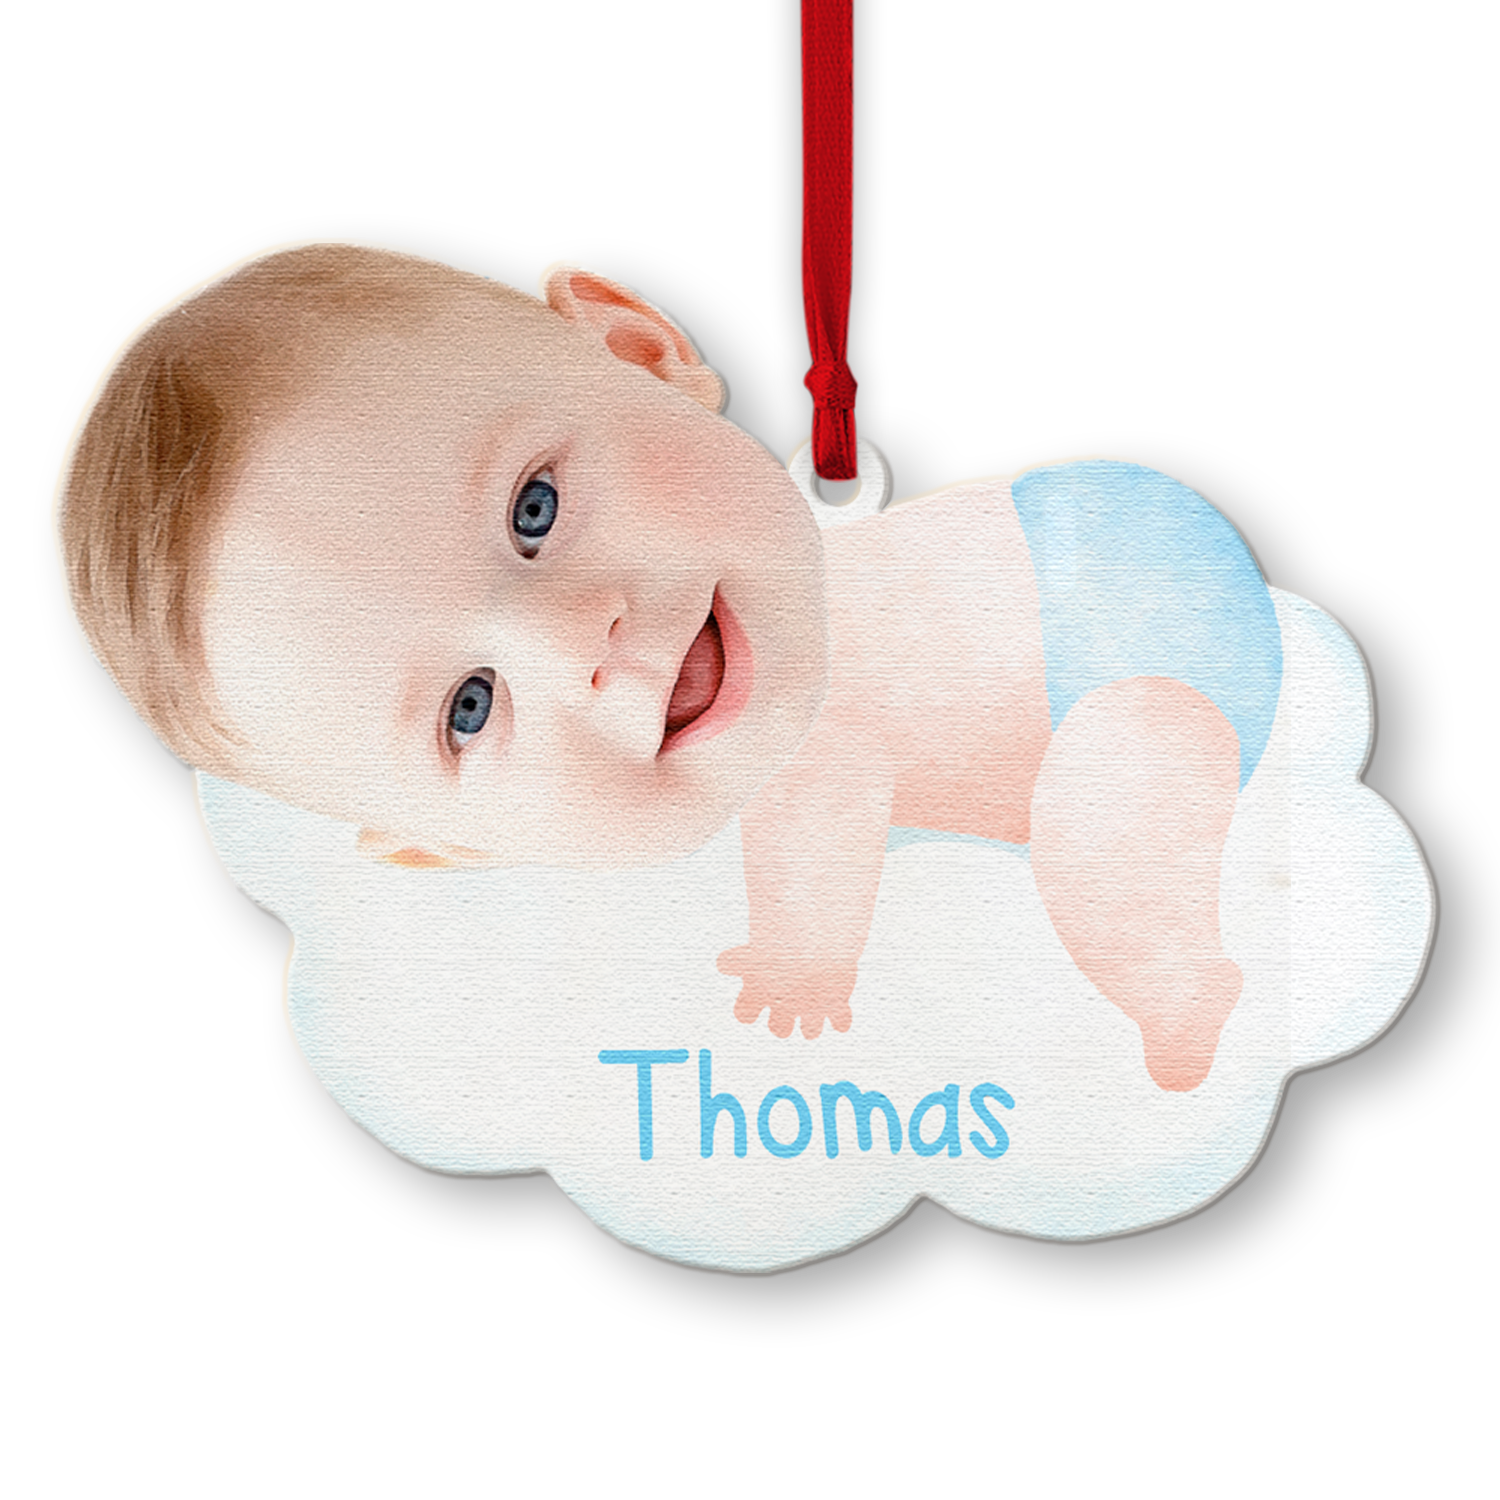 Face From Photo, Ornament For Baby, Hugging Cloud, Personalized Name And Text, Christmas Shape Ornament 2 Sides